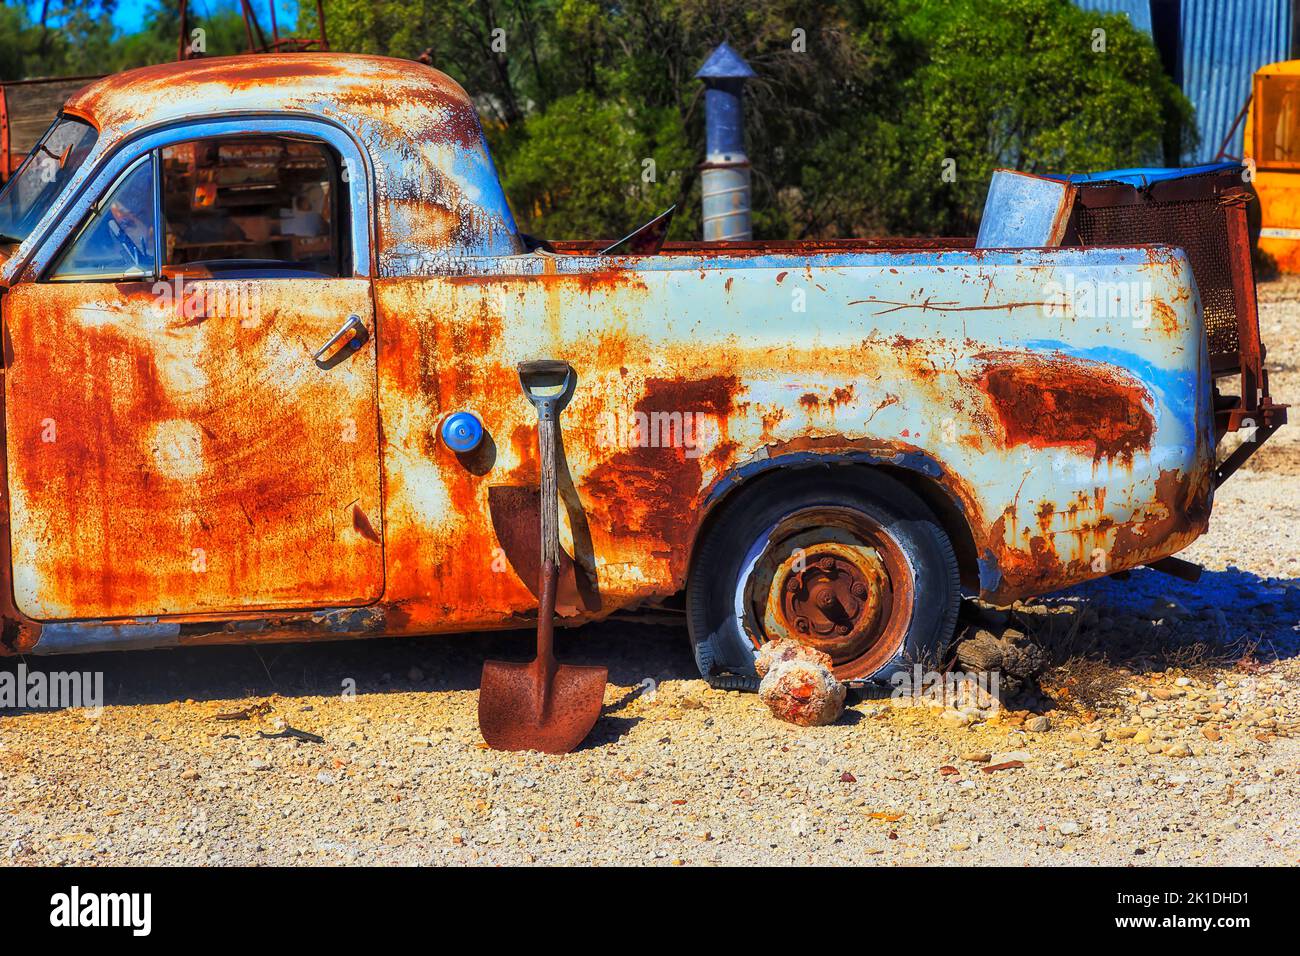 Old rust heritage ute truck vehicle in Lightning Ridge opal mine town of outback Australia. Stock Photo